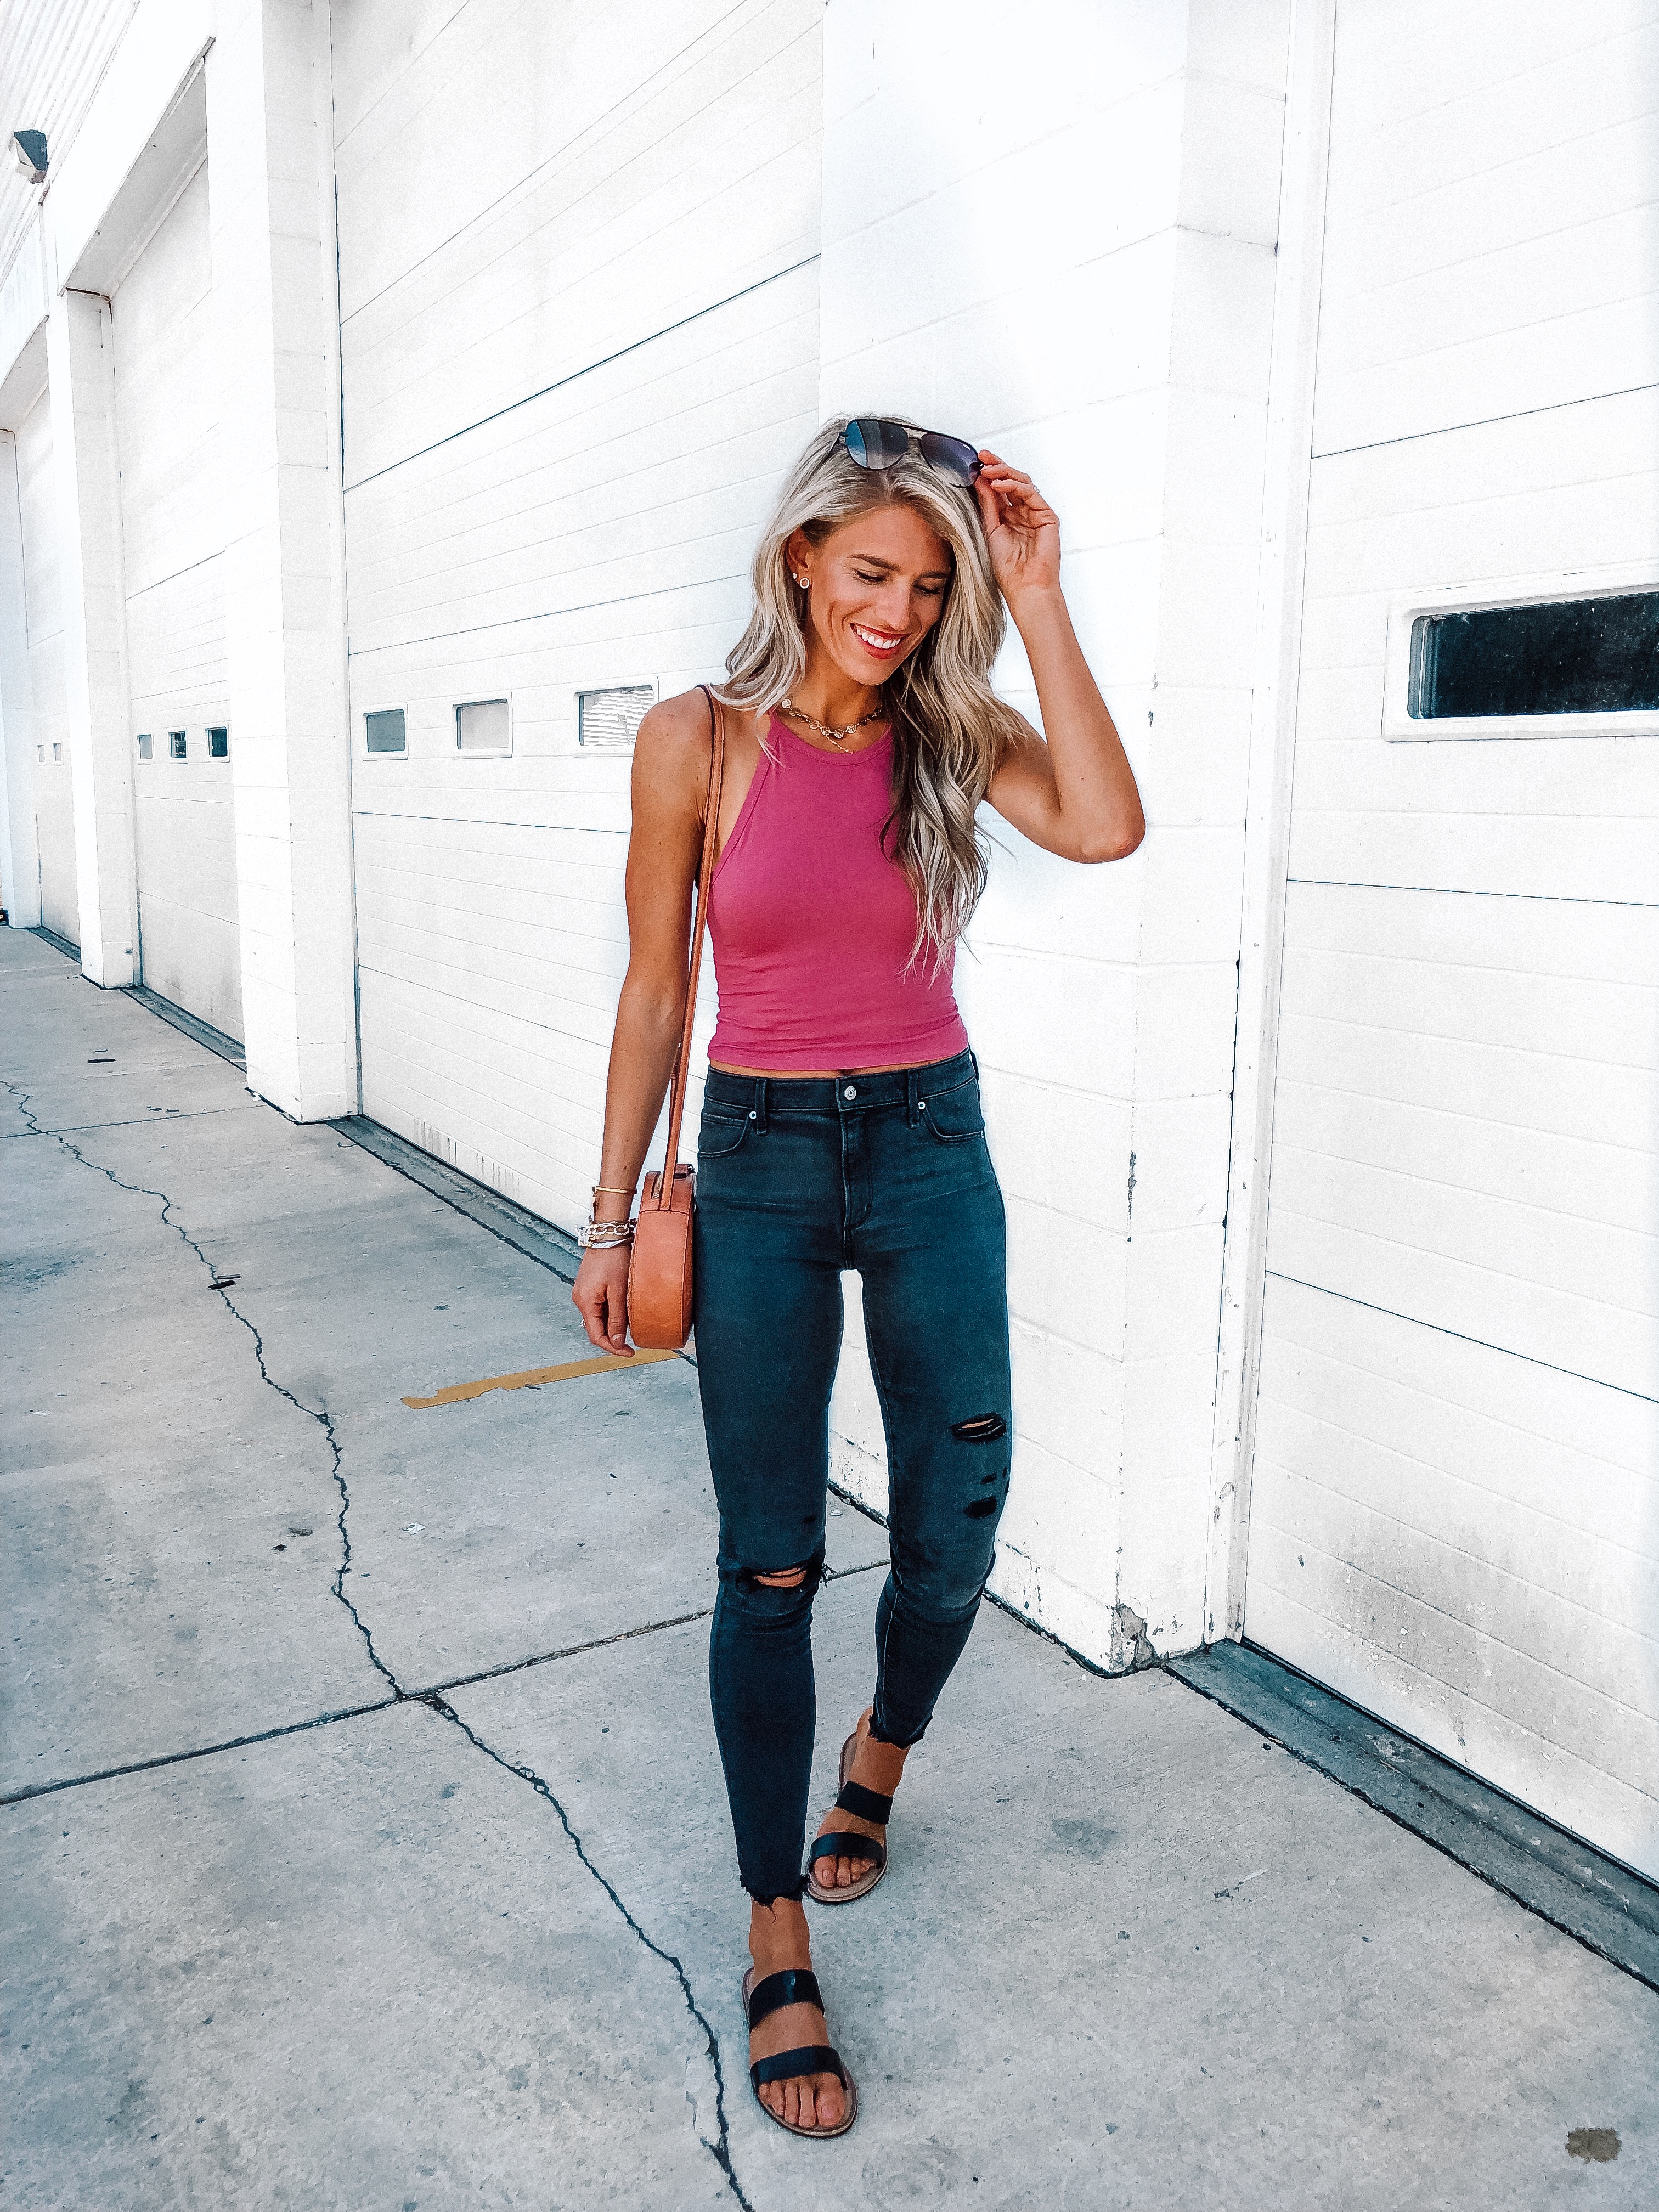 Tall Blonde Bell - Fashion + Lifestyle by Ashley Bell @tallblondebell.com #abercrombiestyle